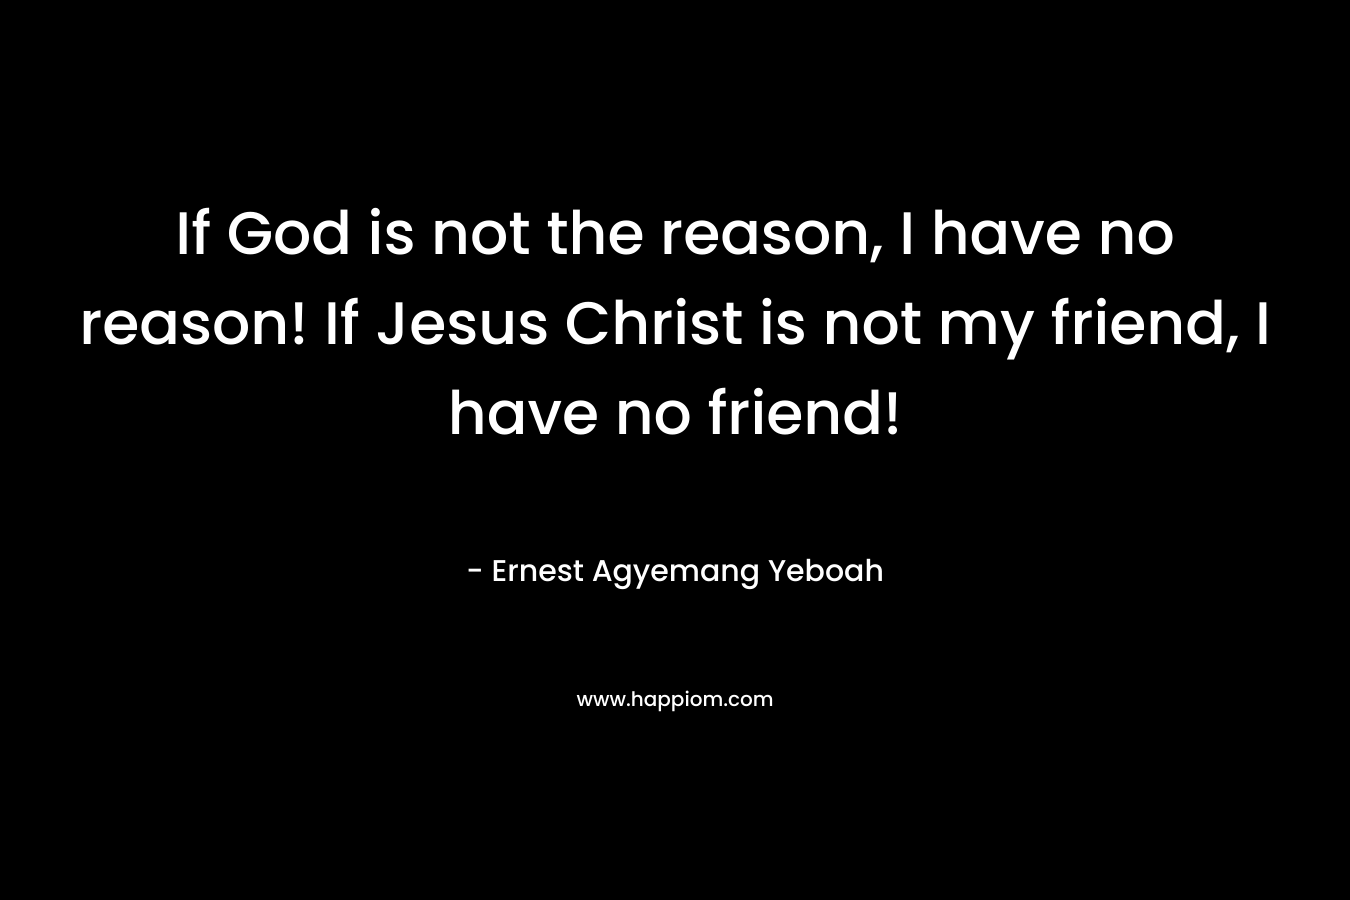 If God is not the reason, I have no reason! If Jesus Christ is not my friend, I have no friend!